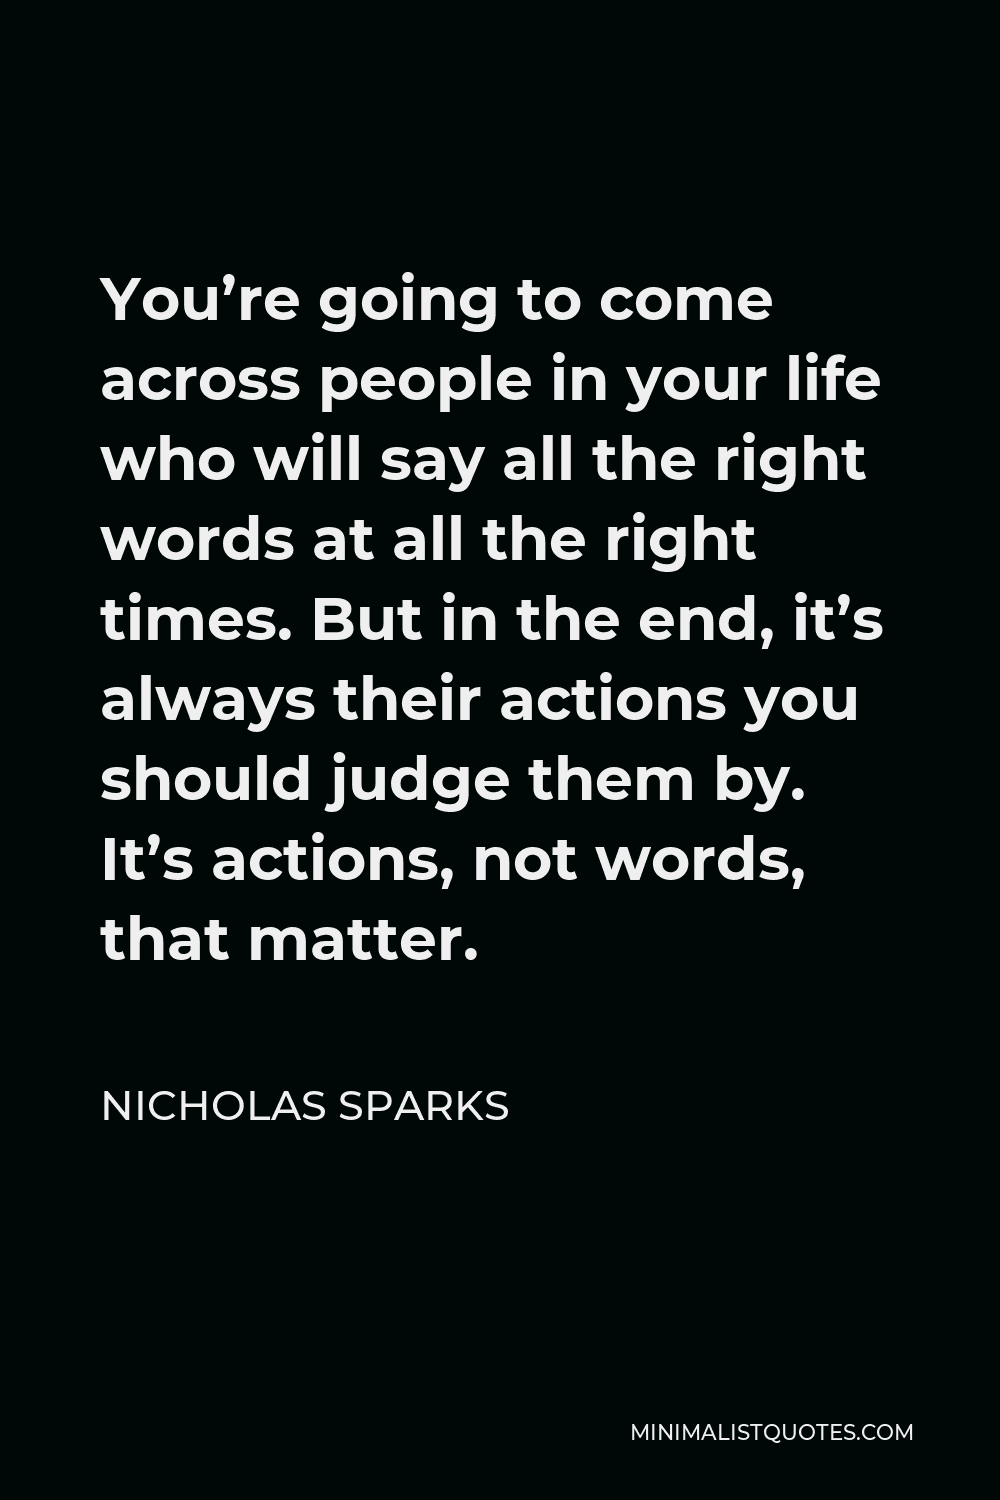 Nicholas Sparks Quote - You’re going to come across people in your life who will say all the right words at all the right times. But in the end, it’s always their actions you should judge them by. It’s actions, not words, that matter.